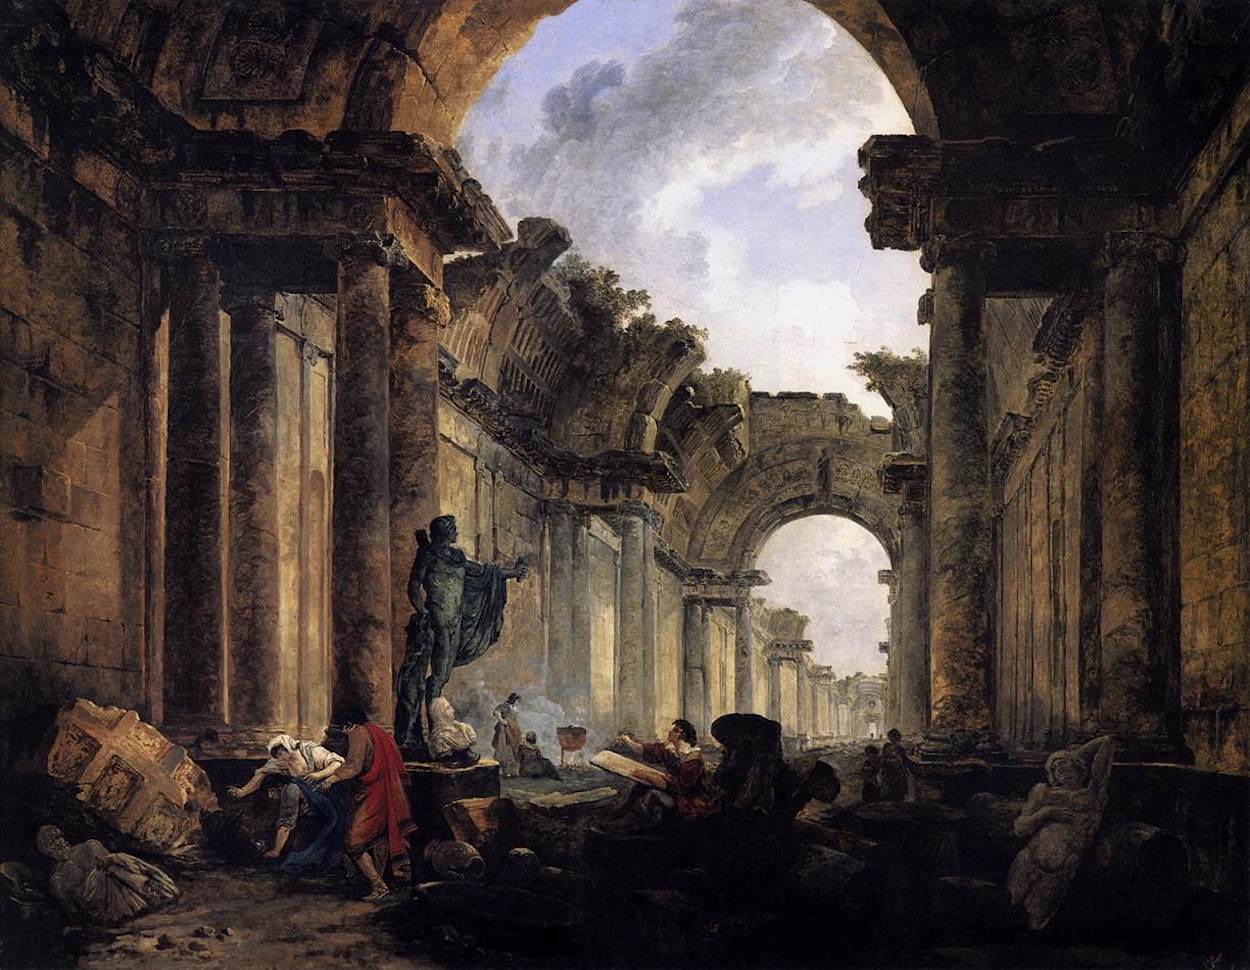 Imaginary View of the Grande Galerie in the Louvre in ruins by Hubert Robert - 1796 - 1,45 x 1,15 m Musée du Louvre